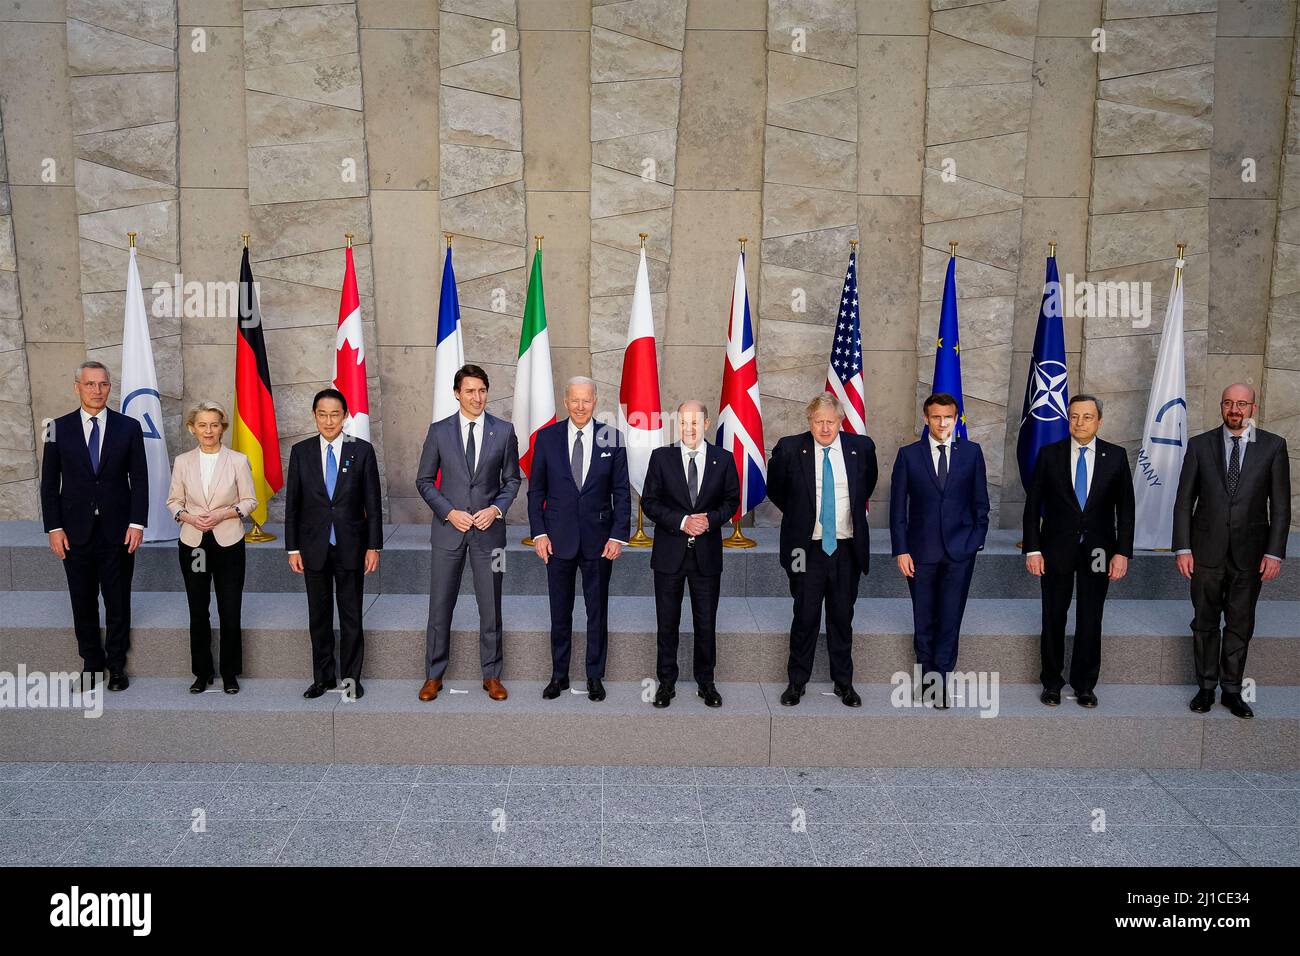 Brussels, Belgium. 24 March, 2022. U.S President Joe Biden stands with G& leaders for a group photo during the emergency meeting of the G7 nations at NATO headquarters, March 24, 2022 in Brussels, Belgium. Standing with from left to right are: NATO Secretary General Jens Stoltenberg, European Commission President Ursula von der Leyen, Japanese Prime Minister Fumio Kishida, Canadian Prime Minister Justin Trudeau, President Joe Biden, German Chancellor Olaf Scholz, British Prime Minister Boris Johnson, French President Emmanuel Macron, Italian Prime Minister Mario Draghi and European Council Pre Stock Photo